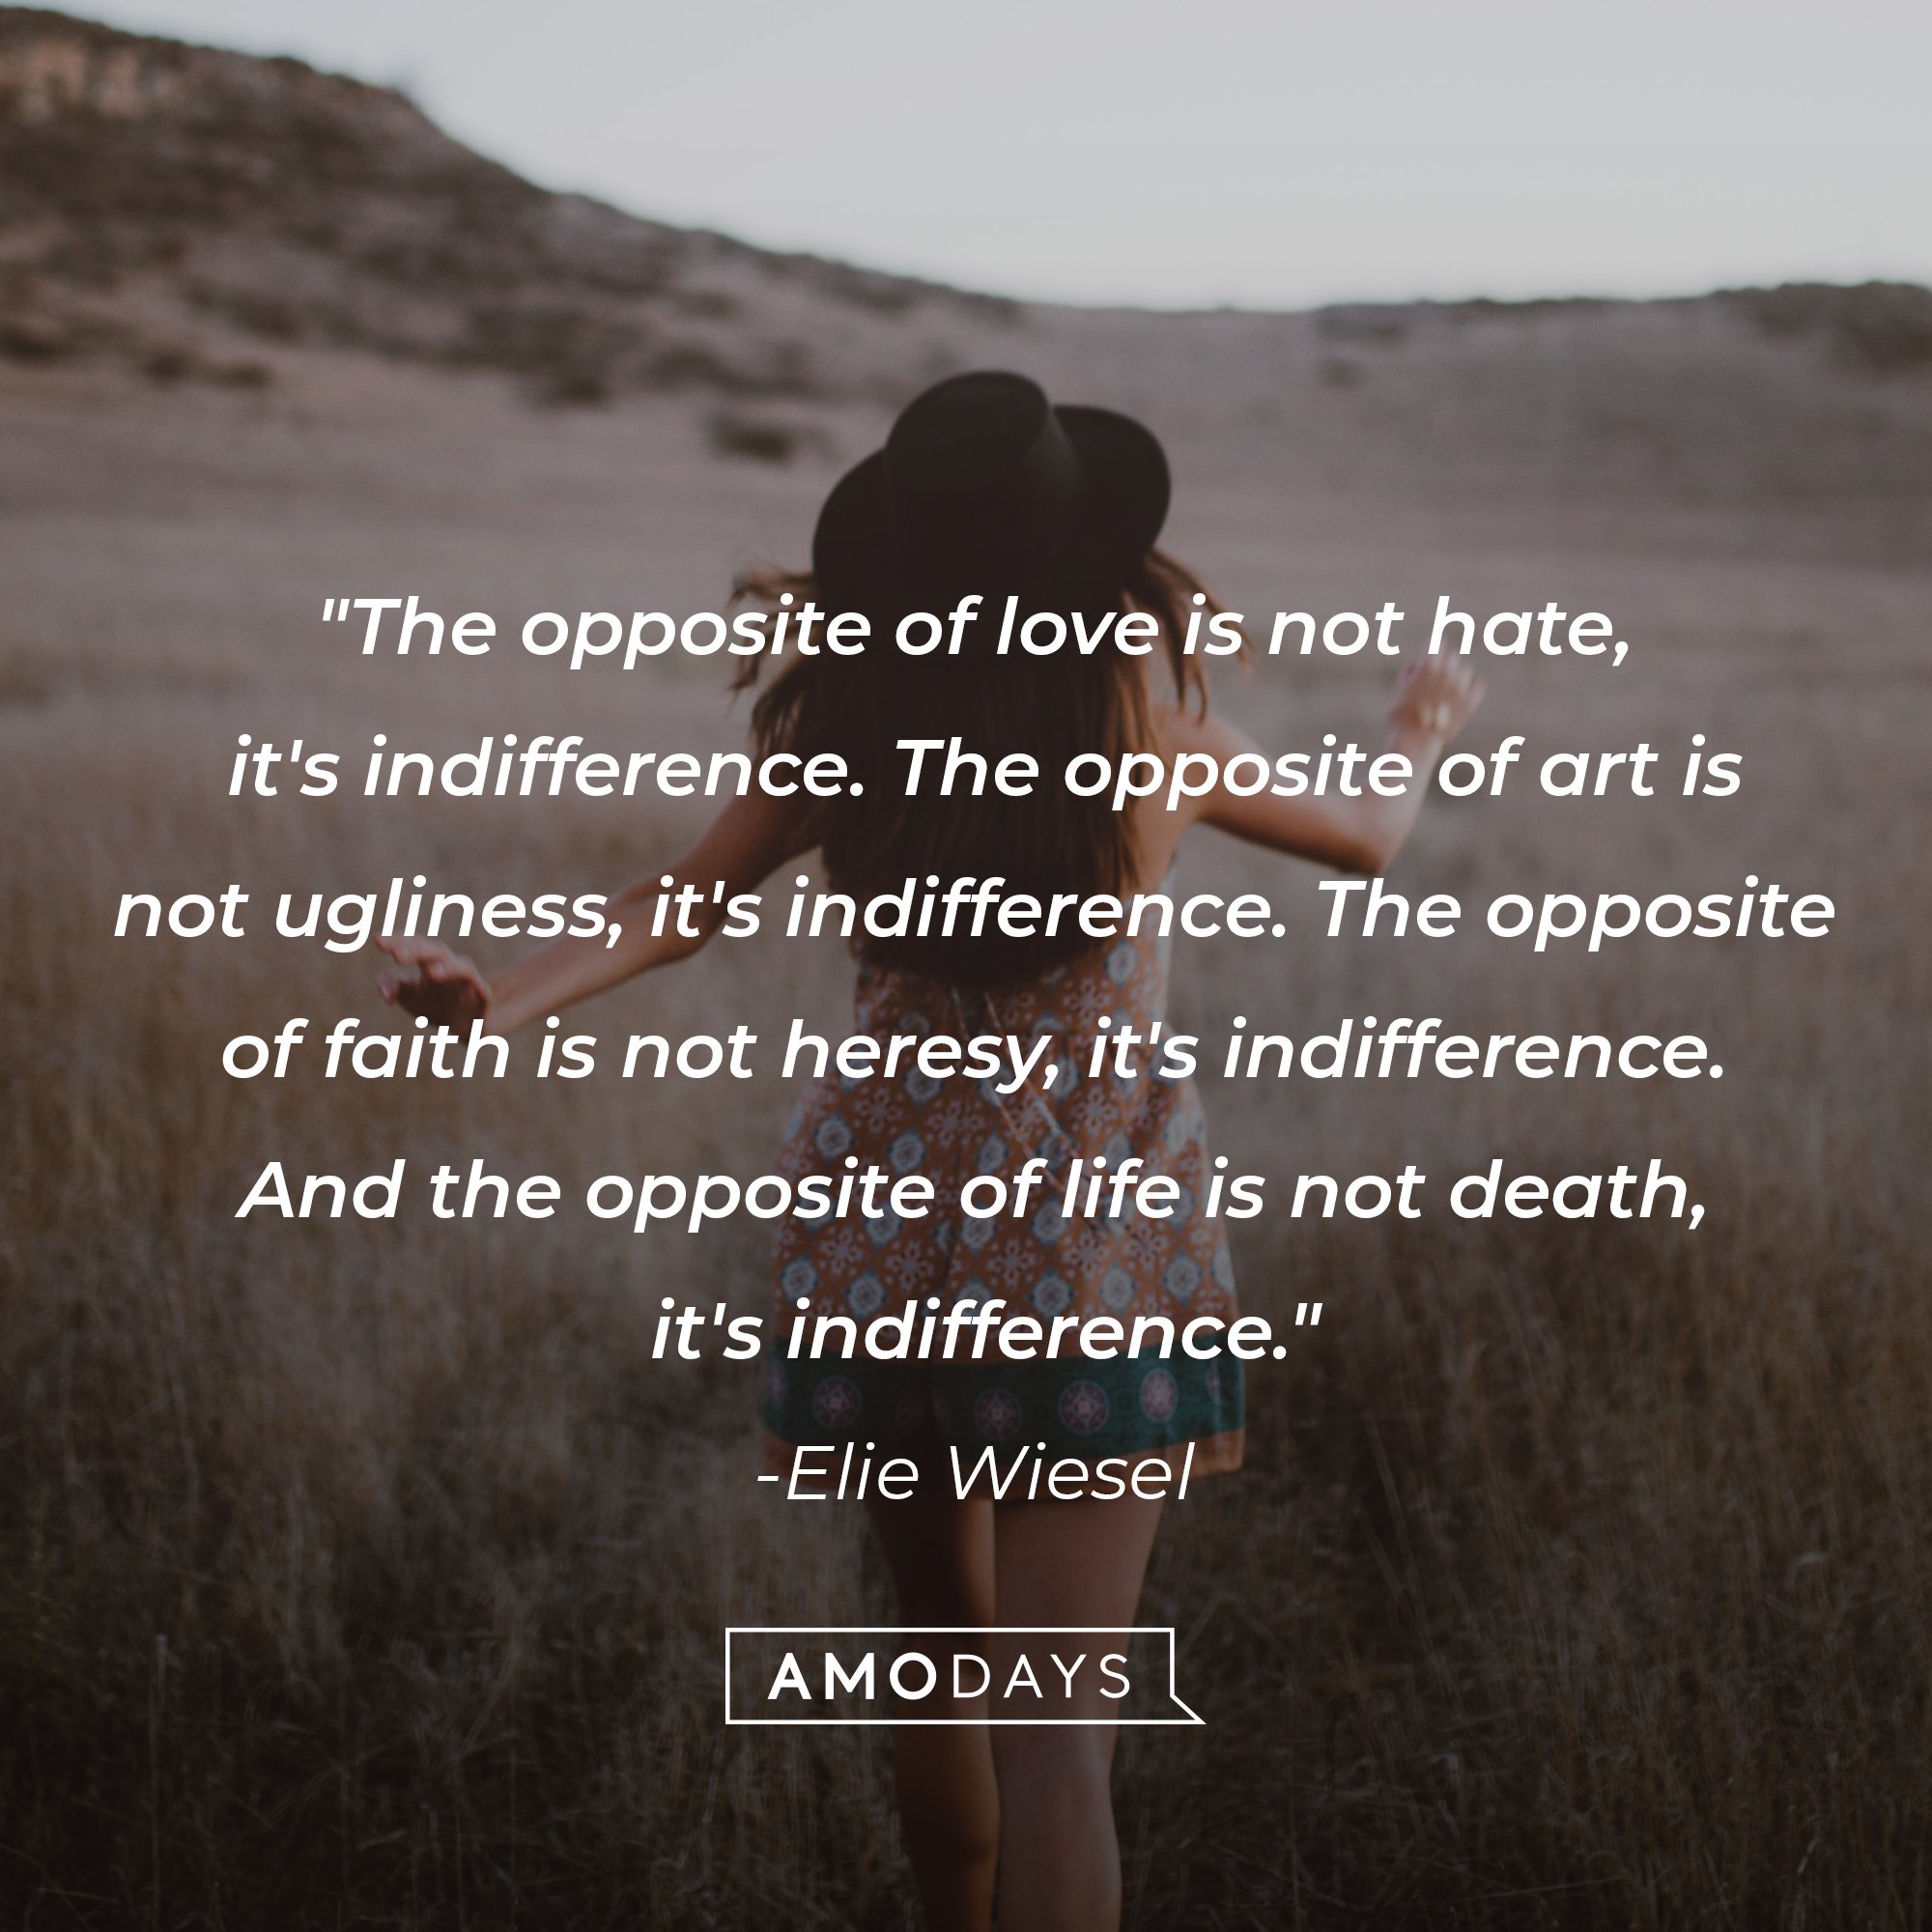 Elie Wiesel's quote: "The opposite of love is not hate, it's indifference. The opposite of art is not ugliness, it's indifference. The opposite of faith is not heresy, it's indifference. And the opposite of life is not death, it's indifference." | Image: AmoDays